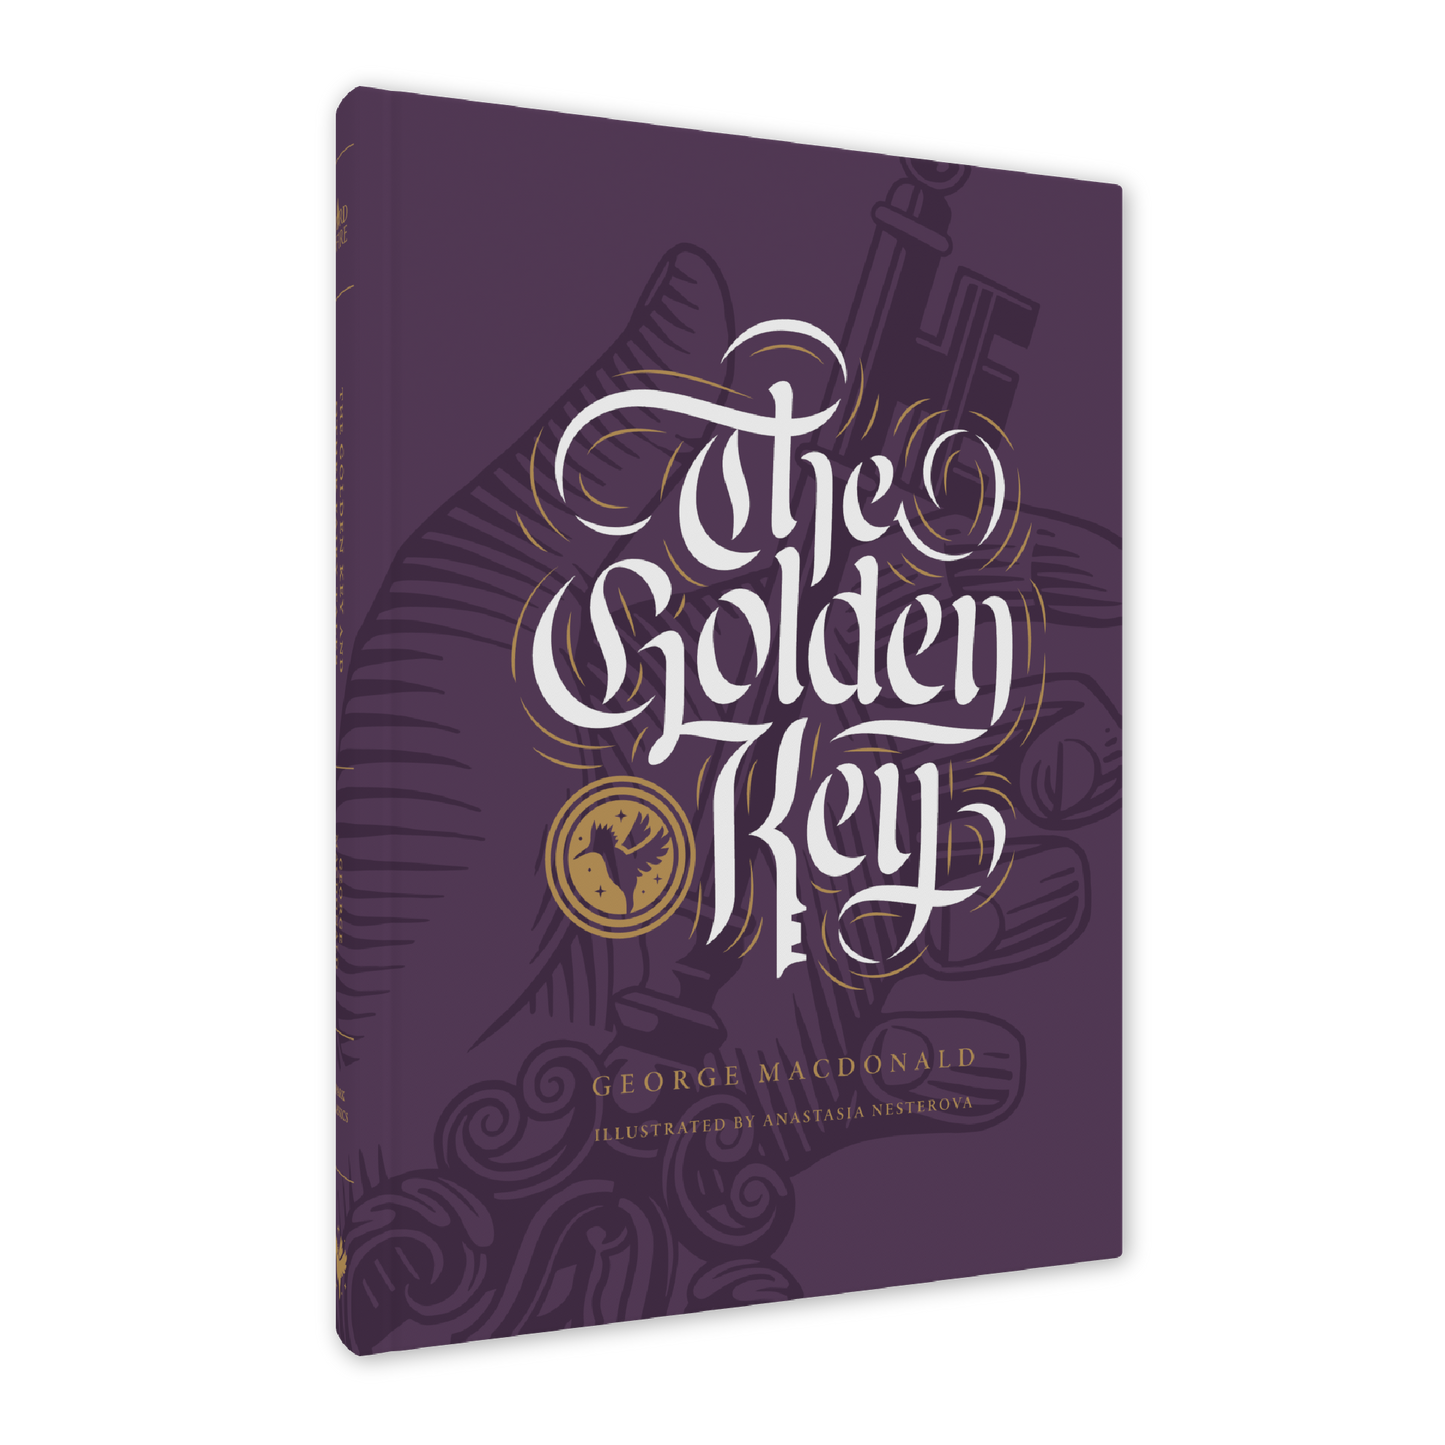 The Golden Key and Other Fairy Tales